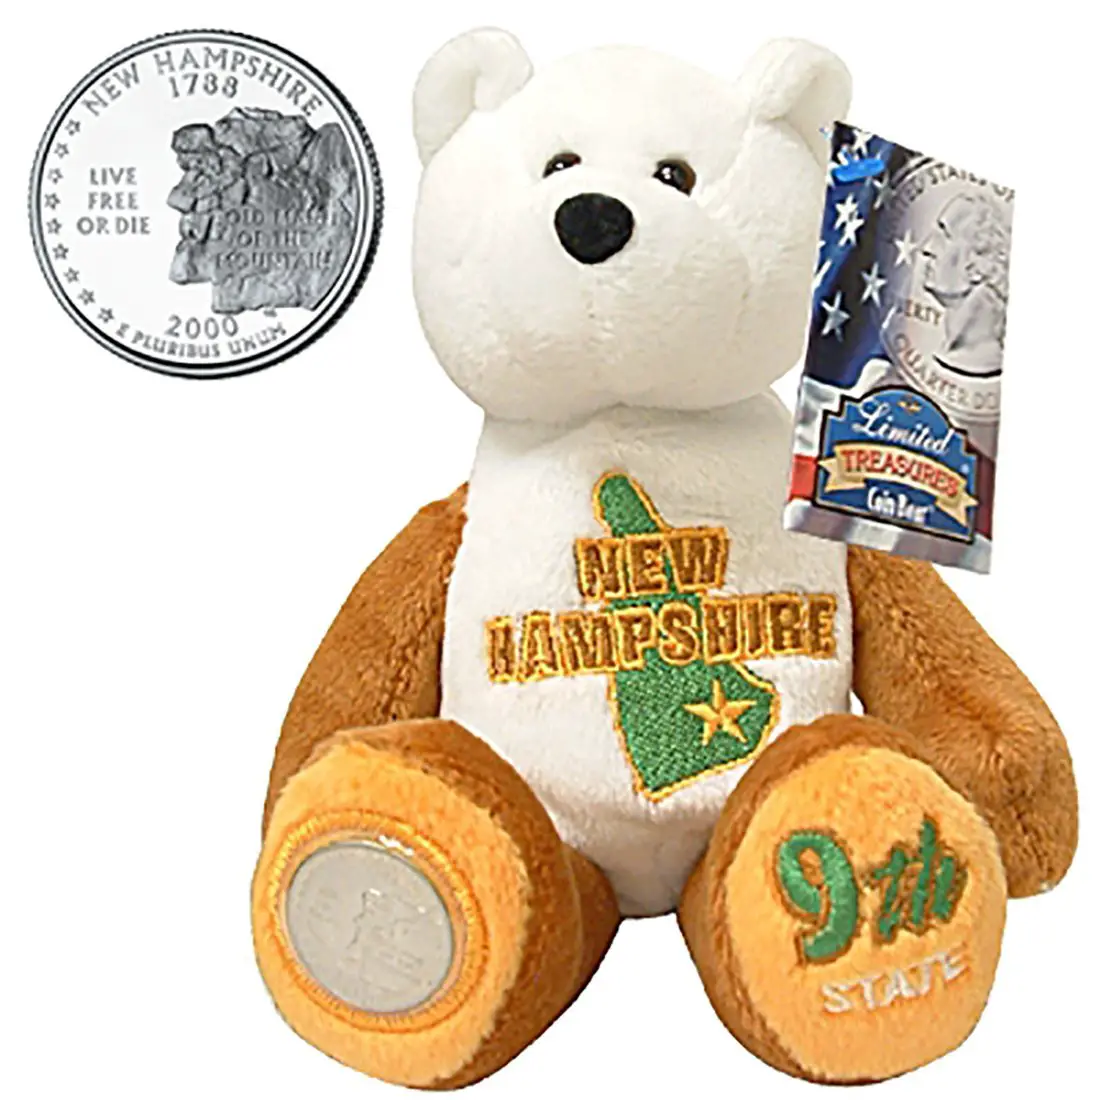 Buy New Hampshire State Quarter Coin Plush Stuffed 9"  Bear Limited ...